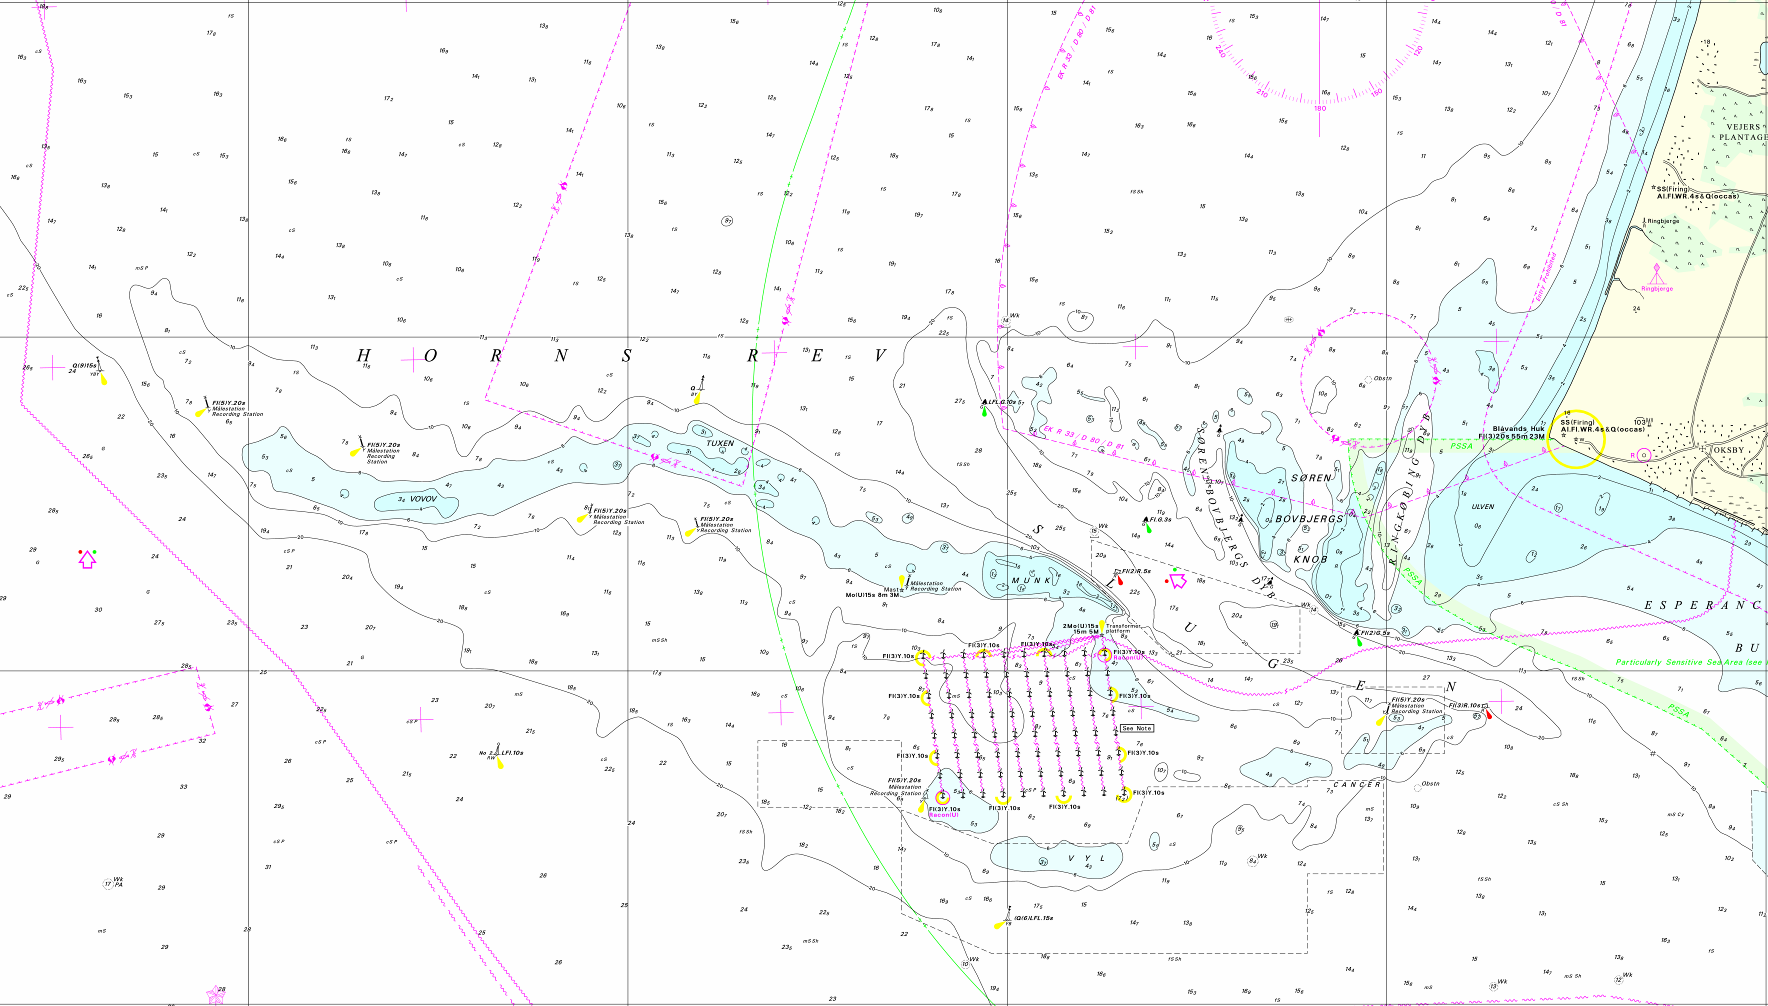 Figure 3.1 Bathymetric map of the Horns Rev area, extract of Sea Chart 61. Locations of Horns Rev 1 and 2 are indicated.